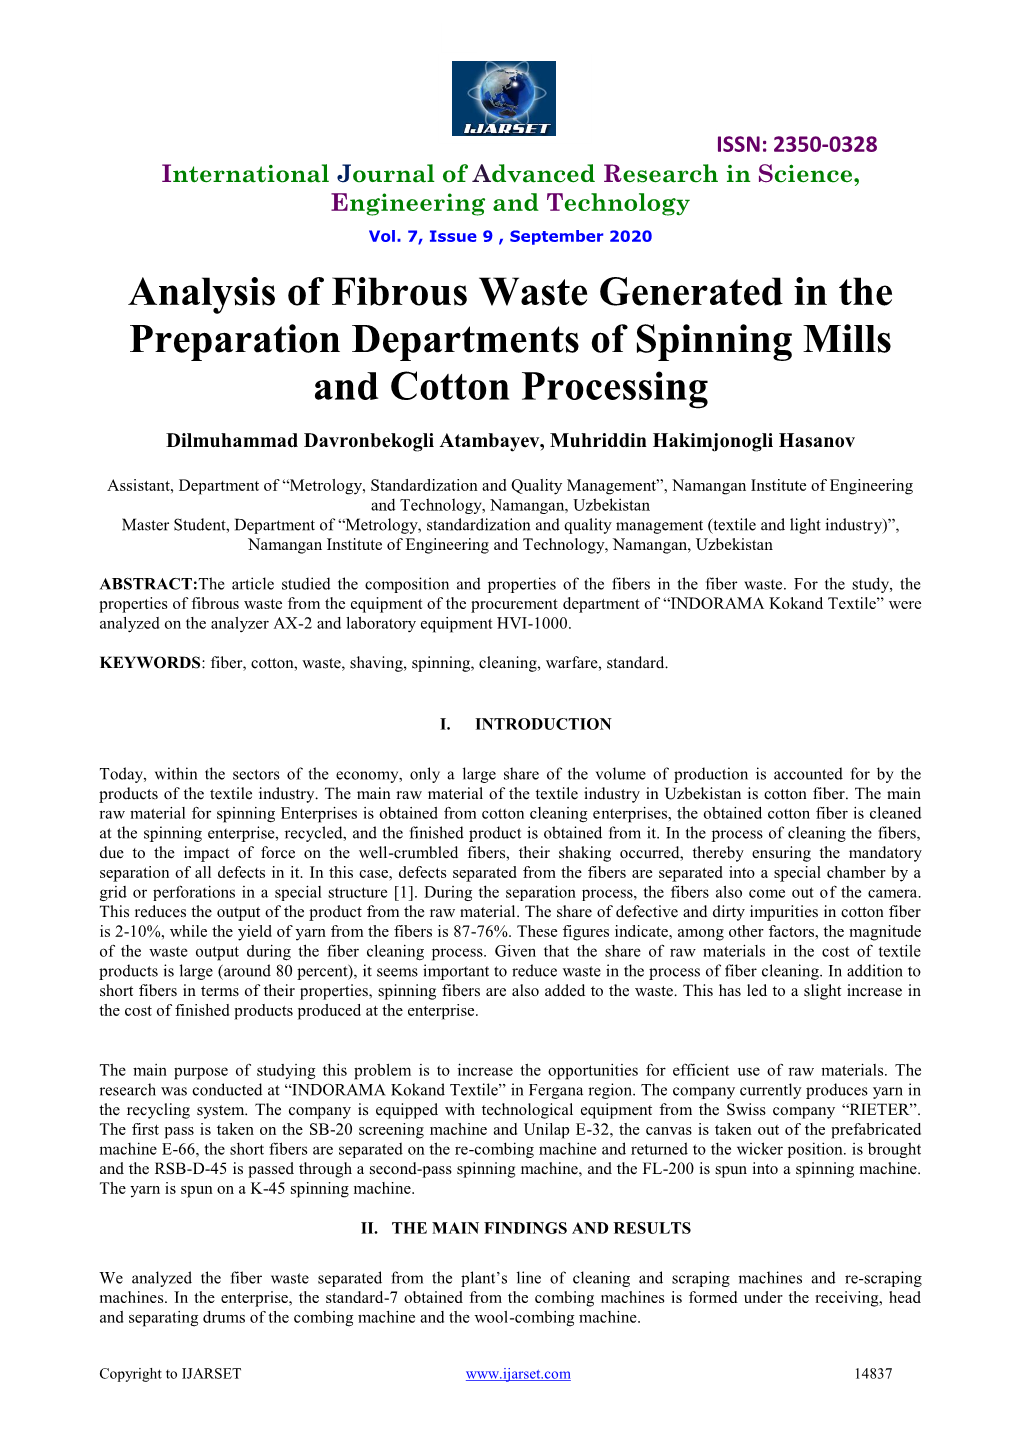 Analysis of Fibrous Waste Generated in the Preparation Departments of Spinning Mills and Cotton Processing